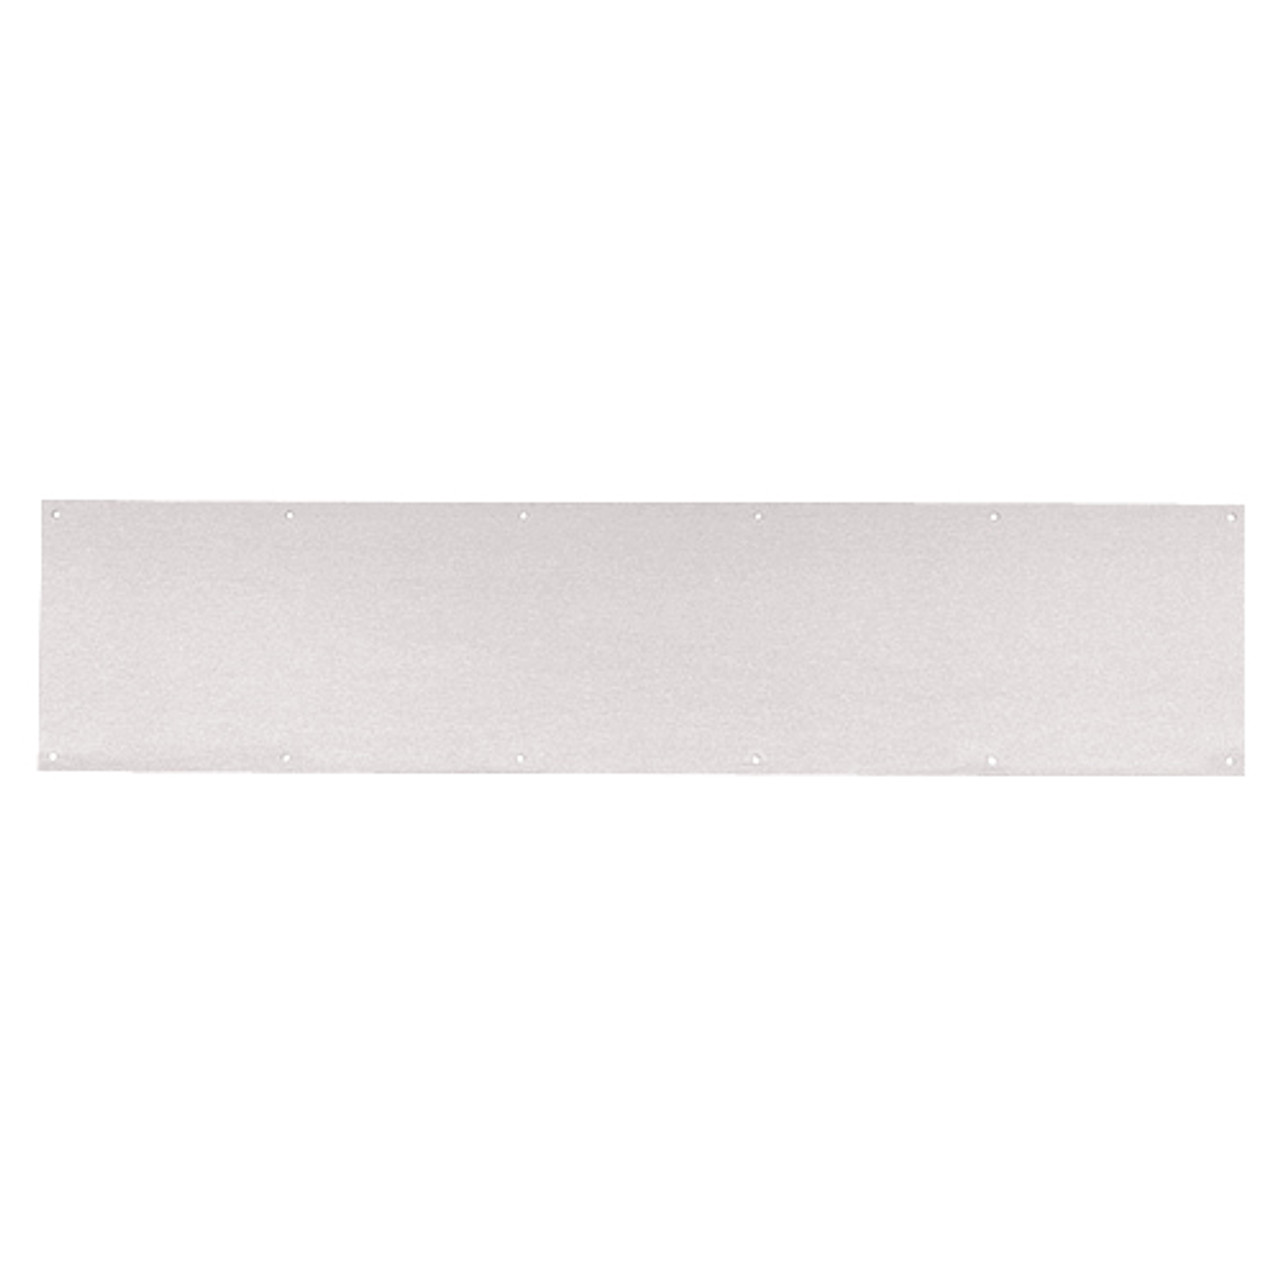 8400-US32-12x36-B-CS Ives 8400 Series Protection Plate in Bright Stainless Steel